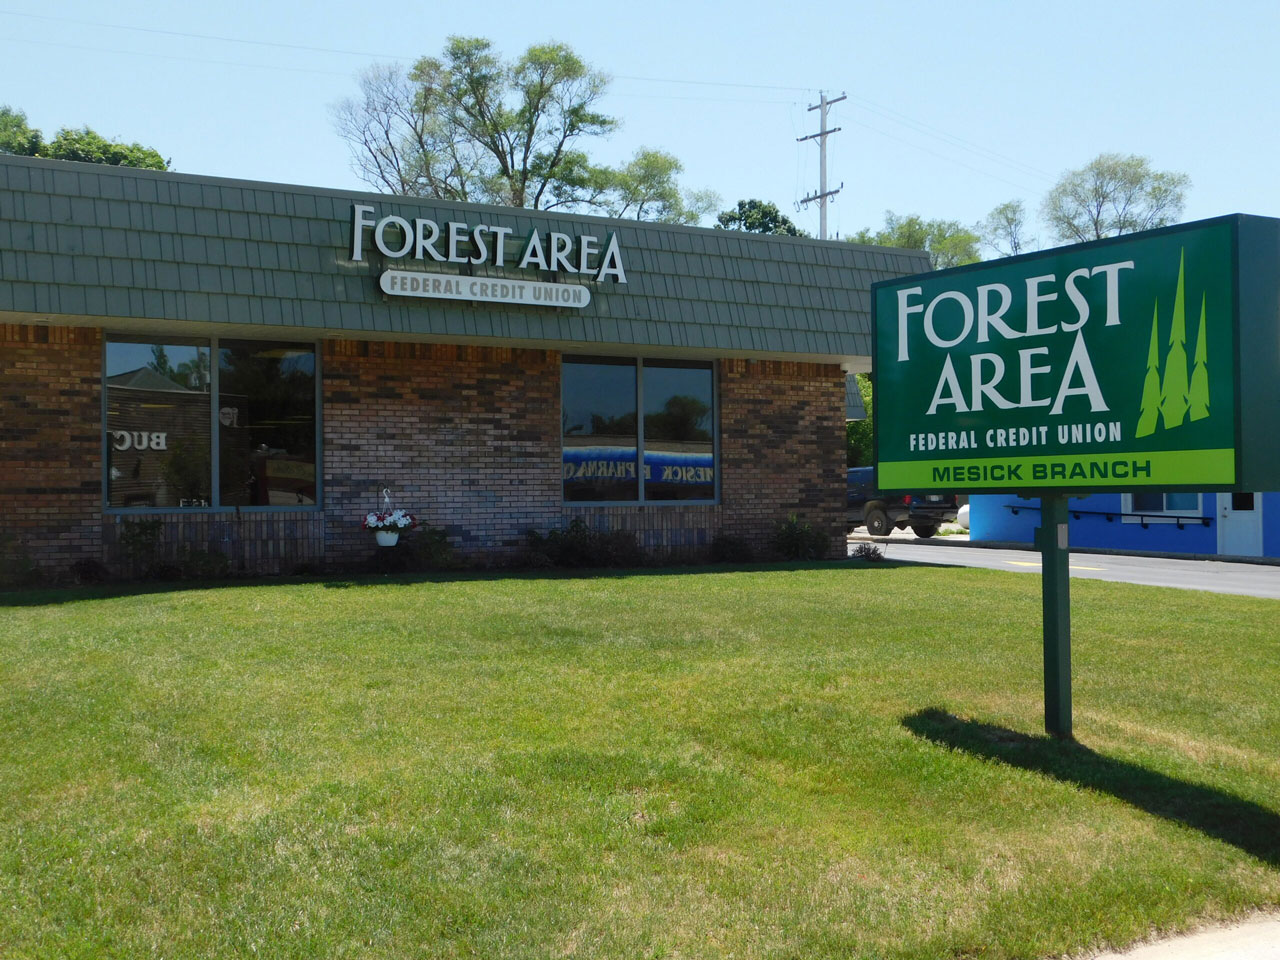 Outside picture of the Mesick branch of Forest Area Federal Credit Union